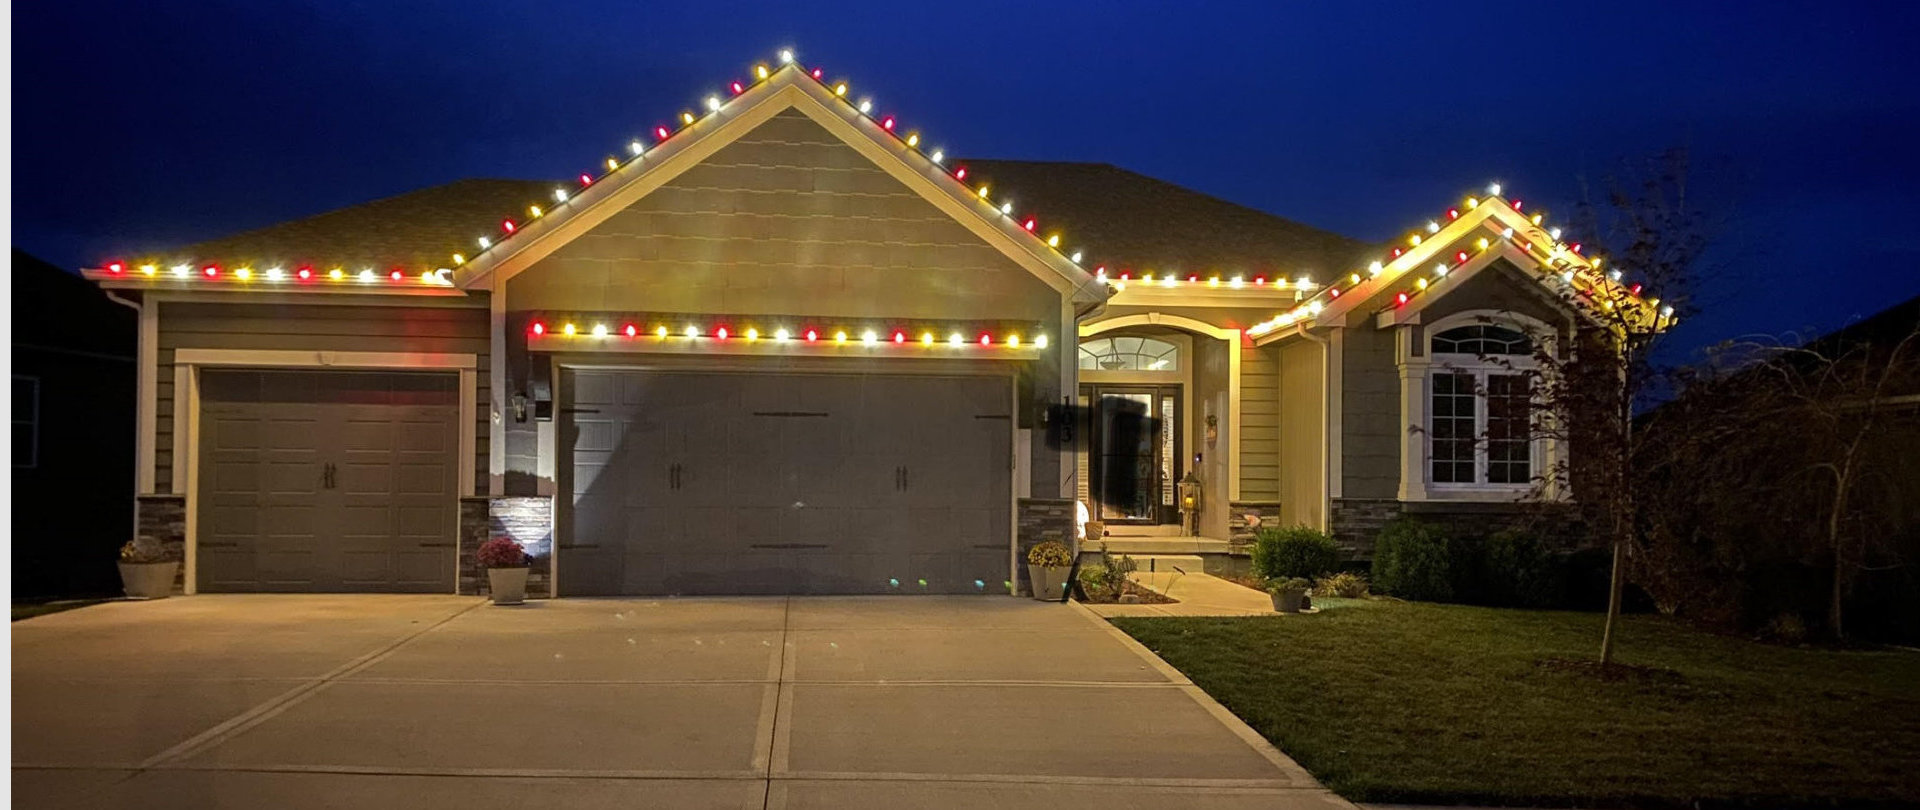 Paxton Holiday Lighting Residential Services